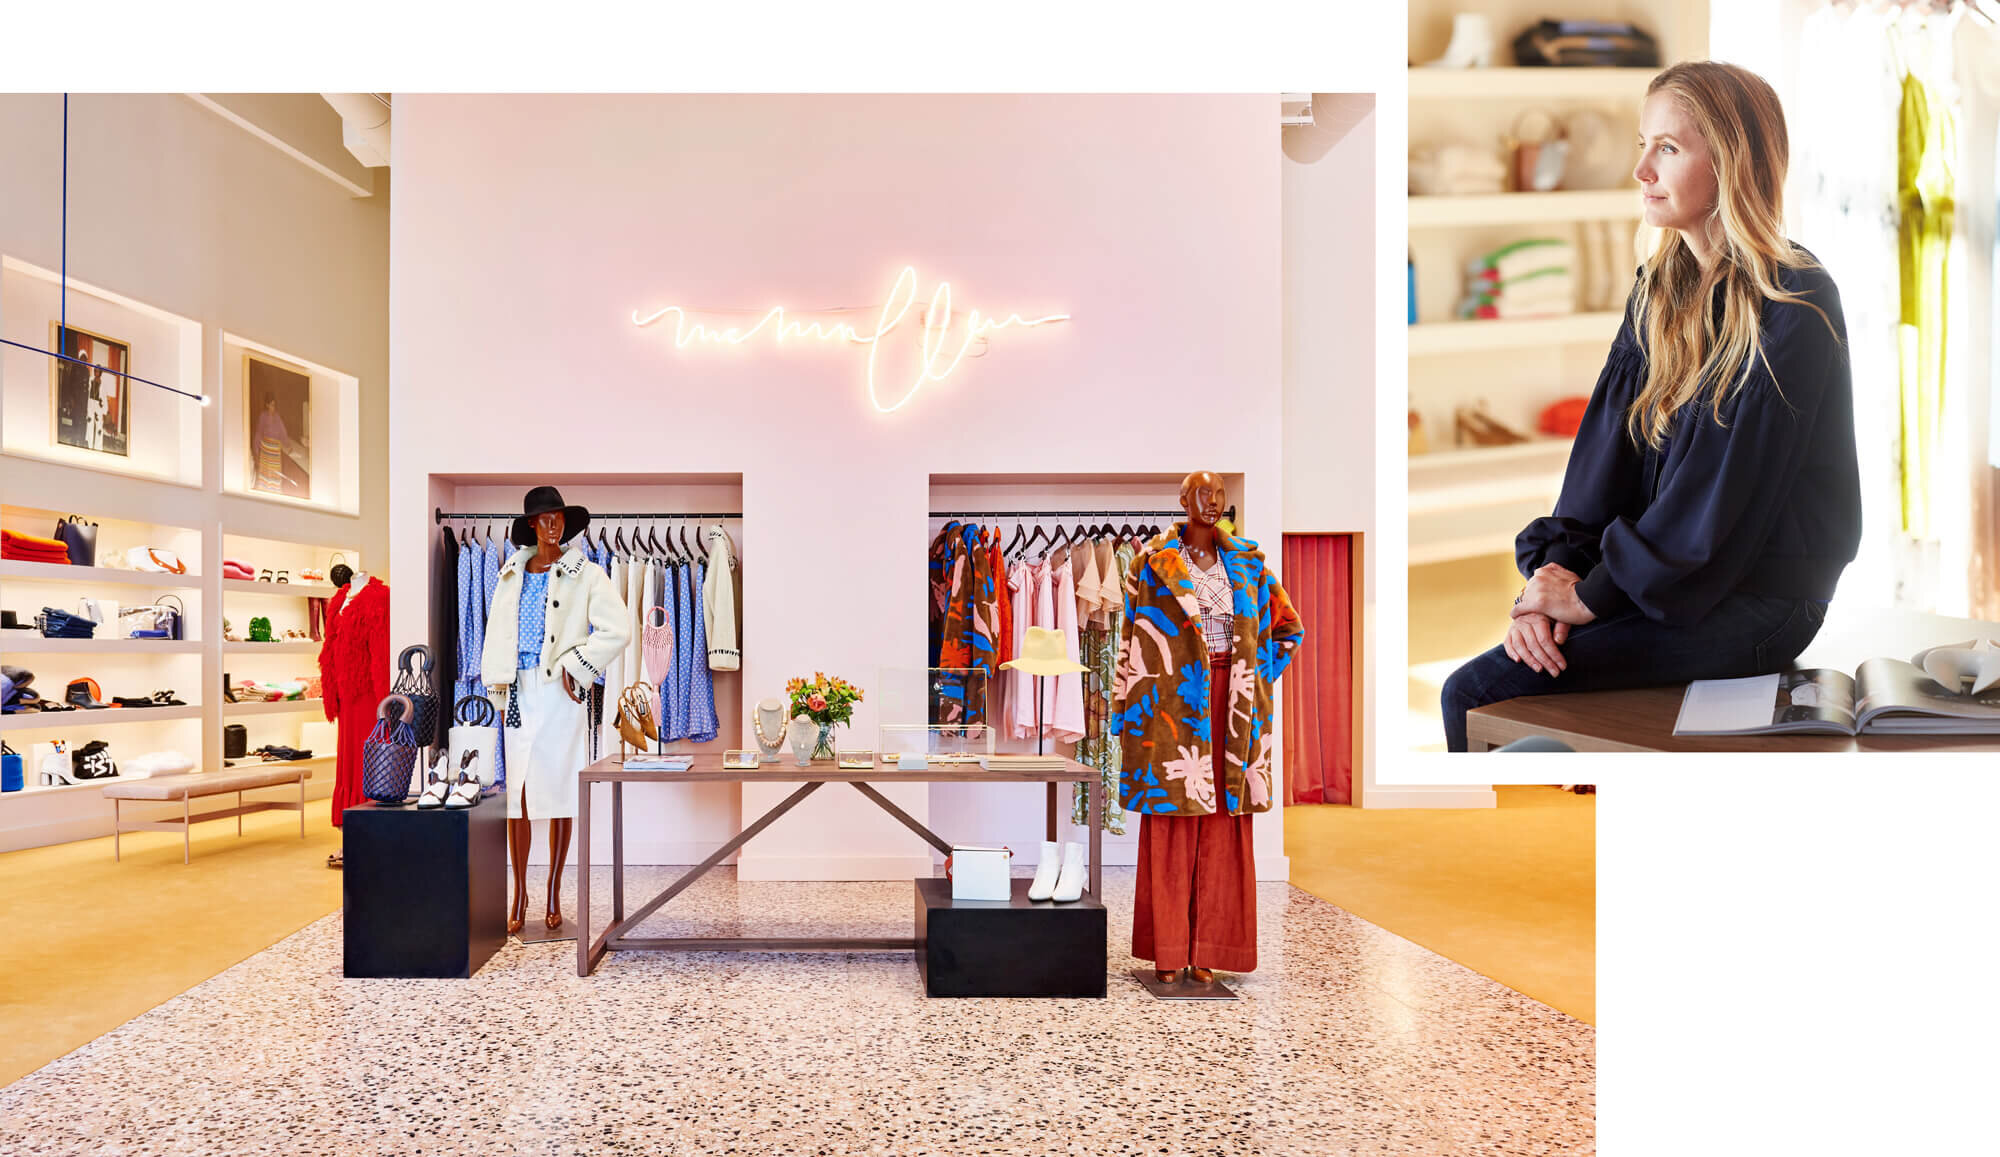 Large image of polished well-lit boutique and an inset image of designer looking away from camera.